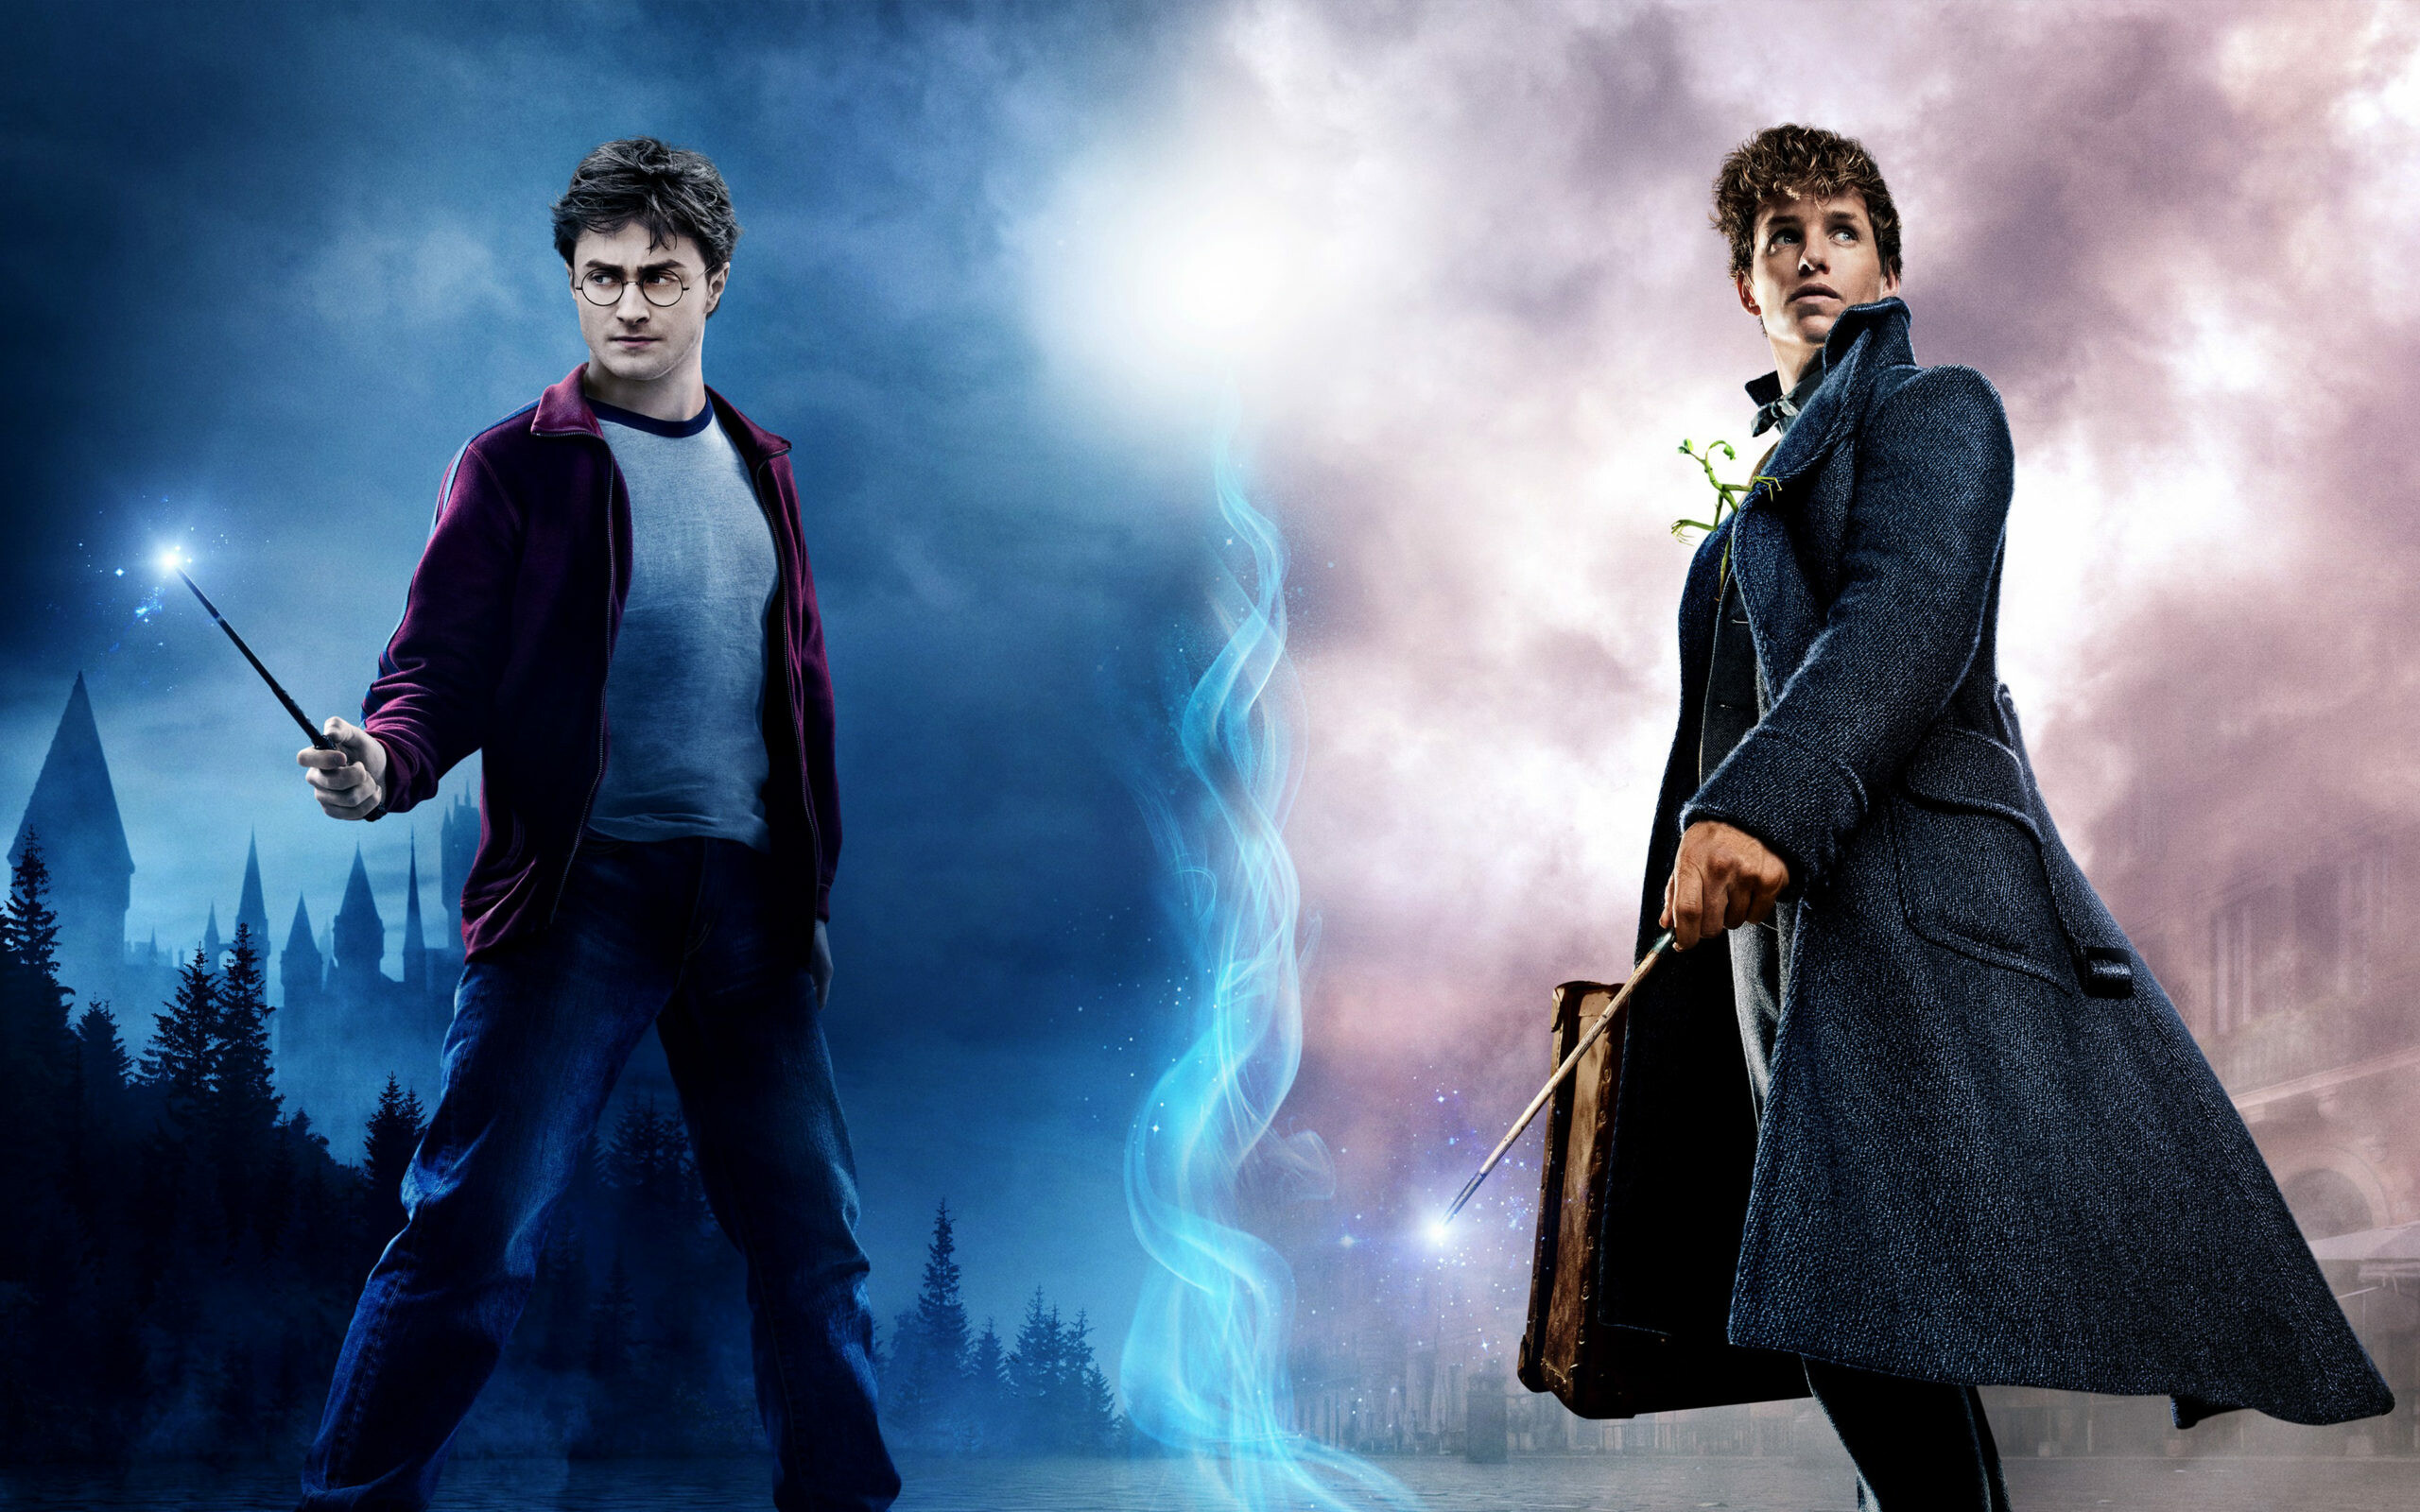 Harry Potter: Fantastic Beasts and Where to Find Them, A spin-off of and prequel to the HP film series. 2560x1600 HD Wallpaper.